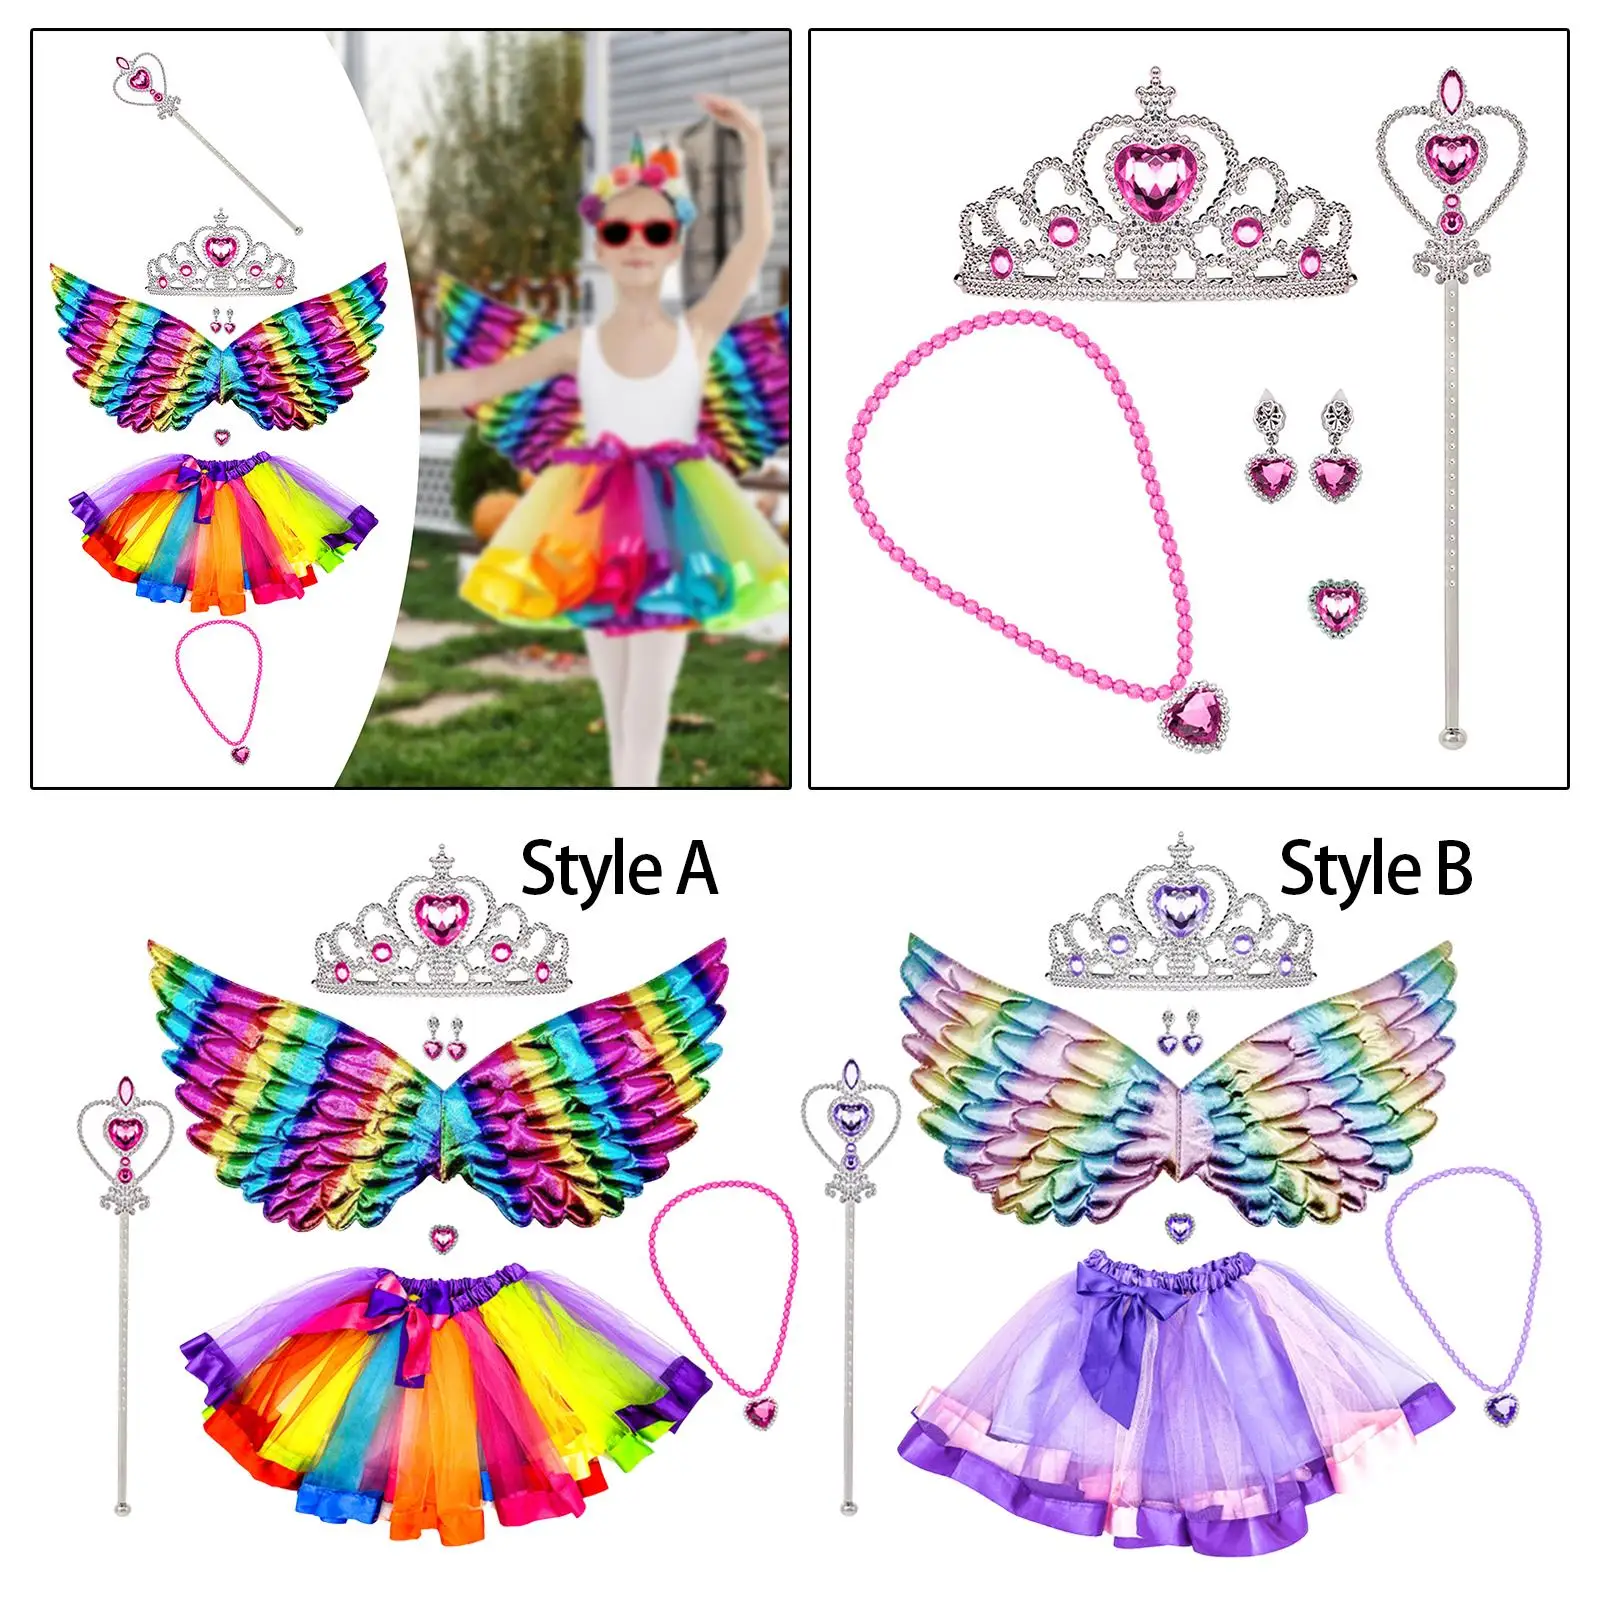 Girls Fairy Costume Cosplay Imaginative Play Party Favors Stage Performance with Wing for Halloween Festival Carnivals Nightclub